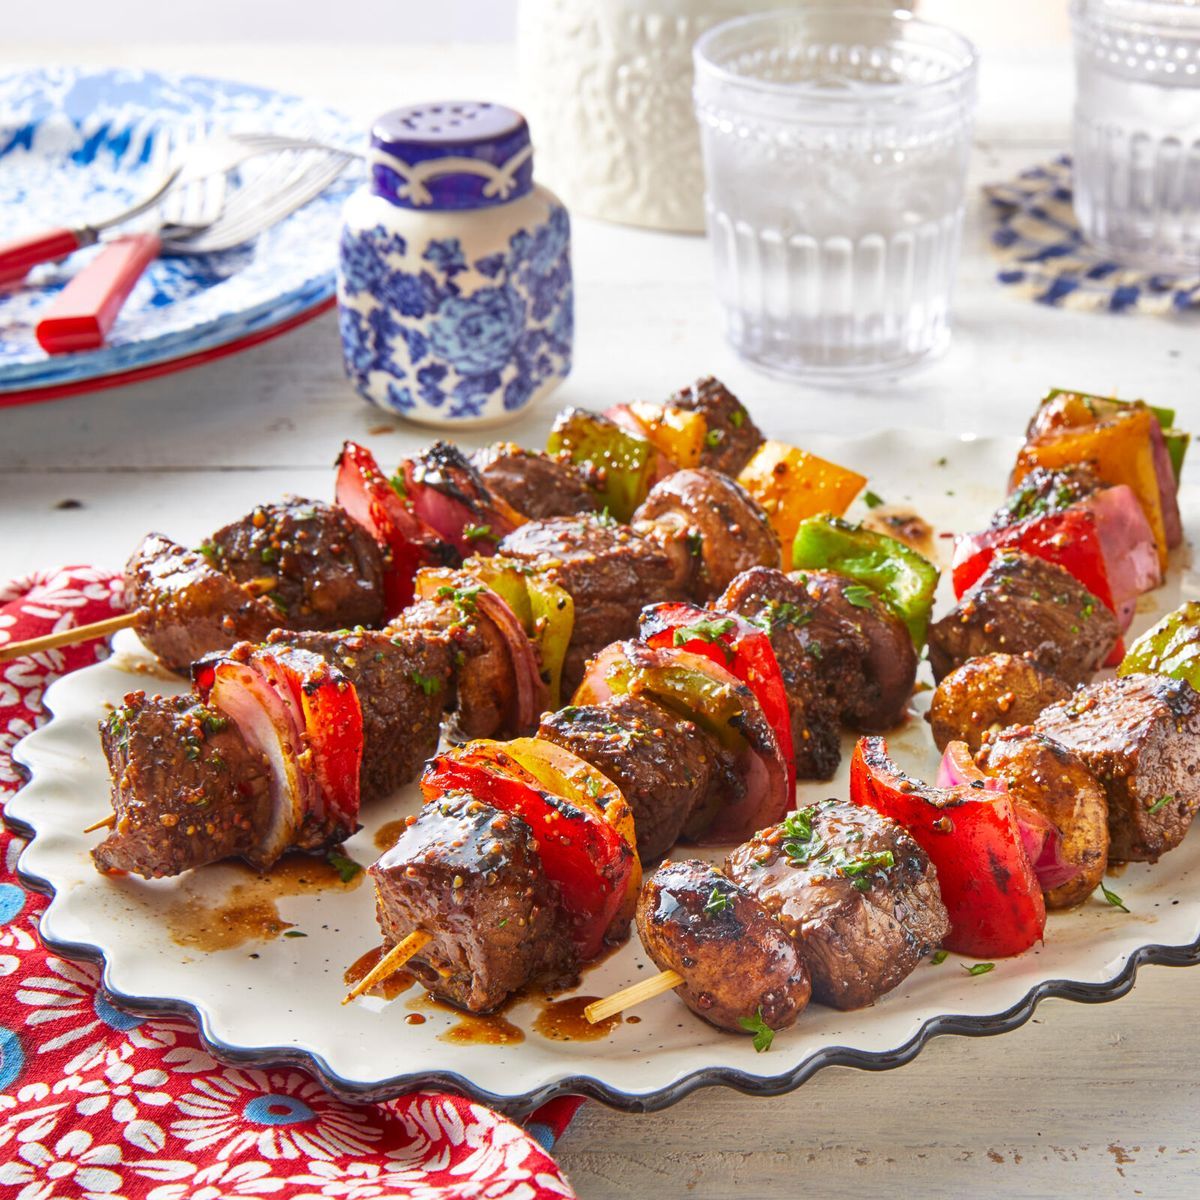 Skewered: Exciting BBQ Recipes 